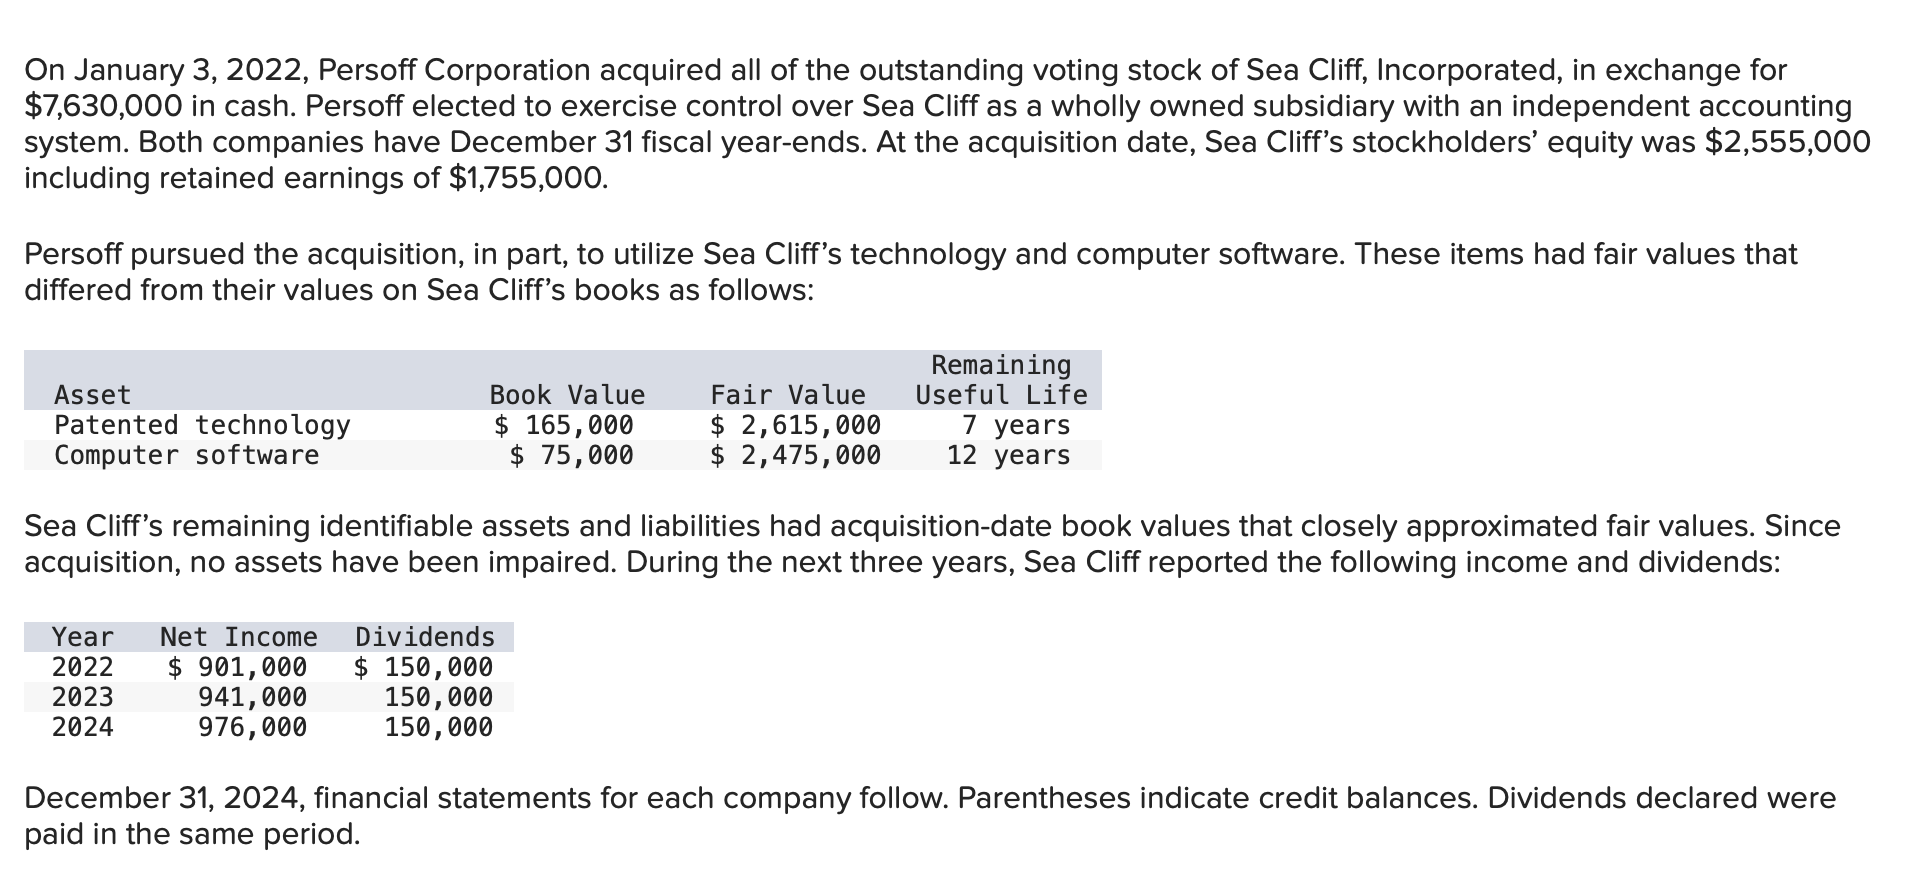 On January 3, 2022, Persoff Corporation acquired all